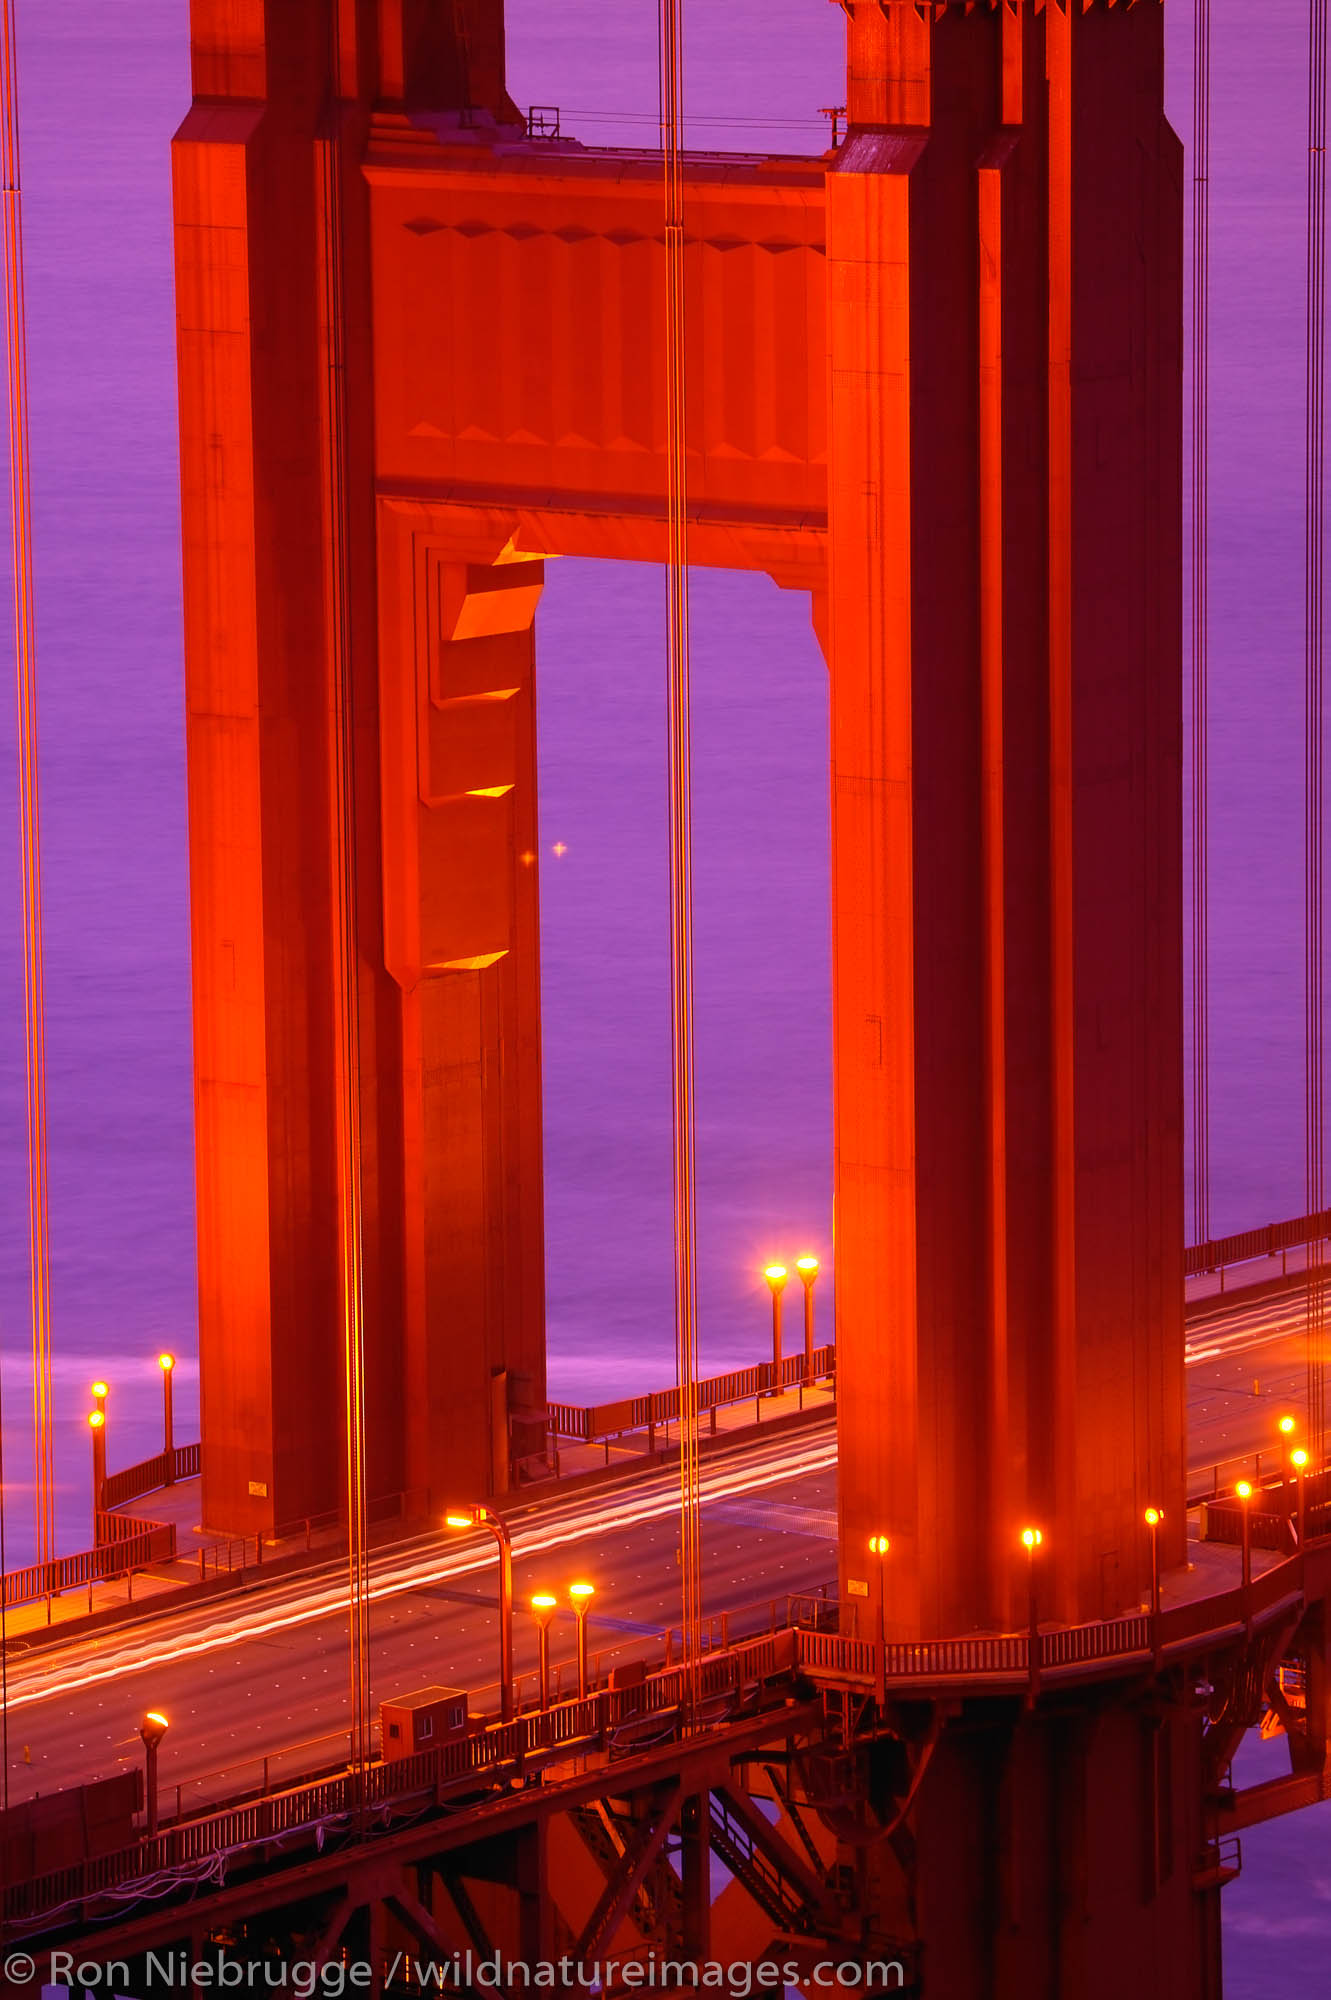 The streaks of lights from autos on the Golden Gate Bridge in the evening, San Francisco, California.